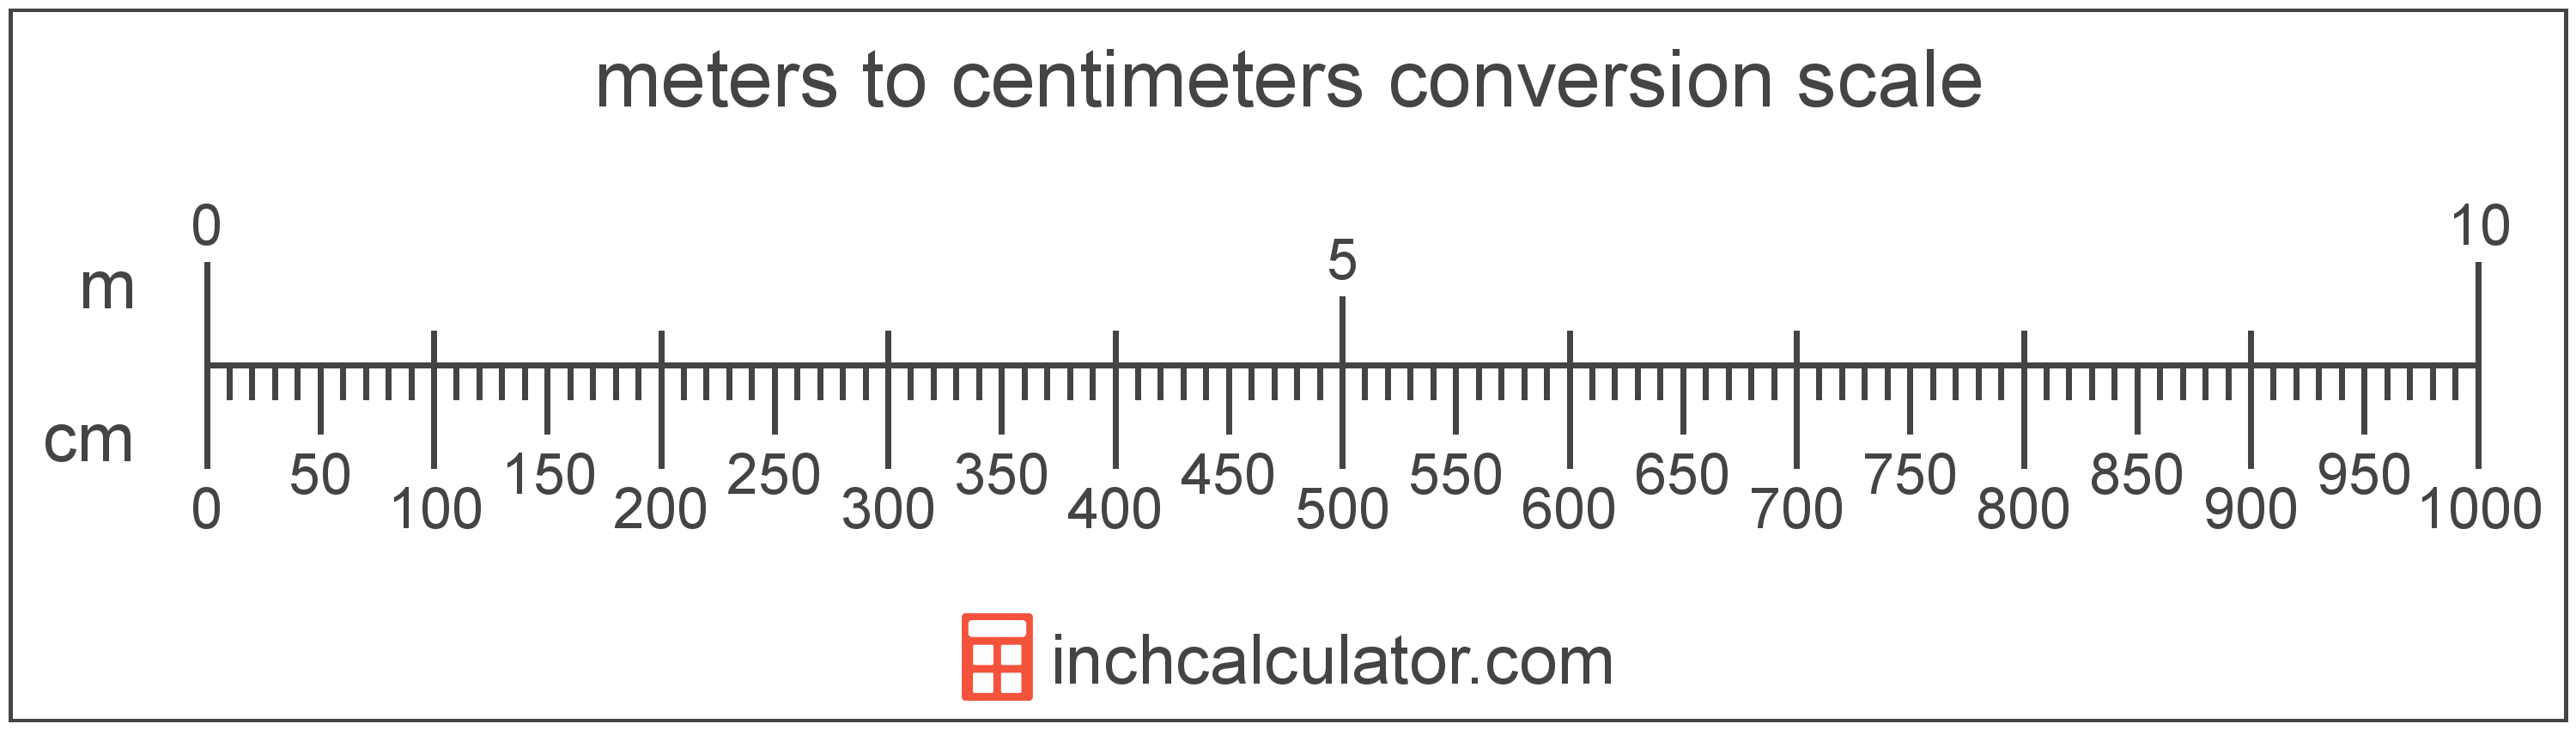 conversion scale showing centimeters and equivalent meters length values